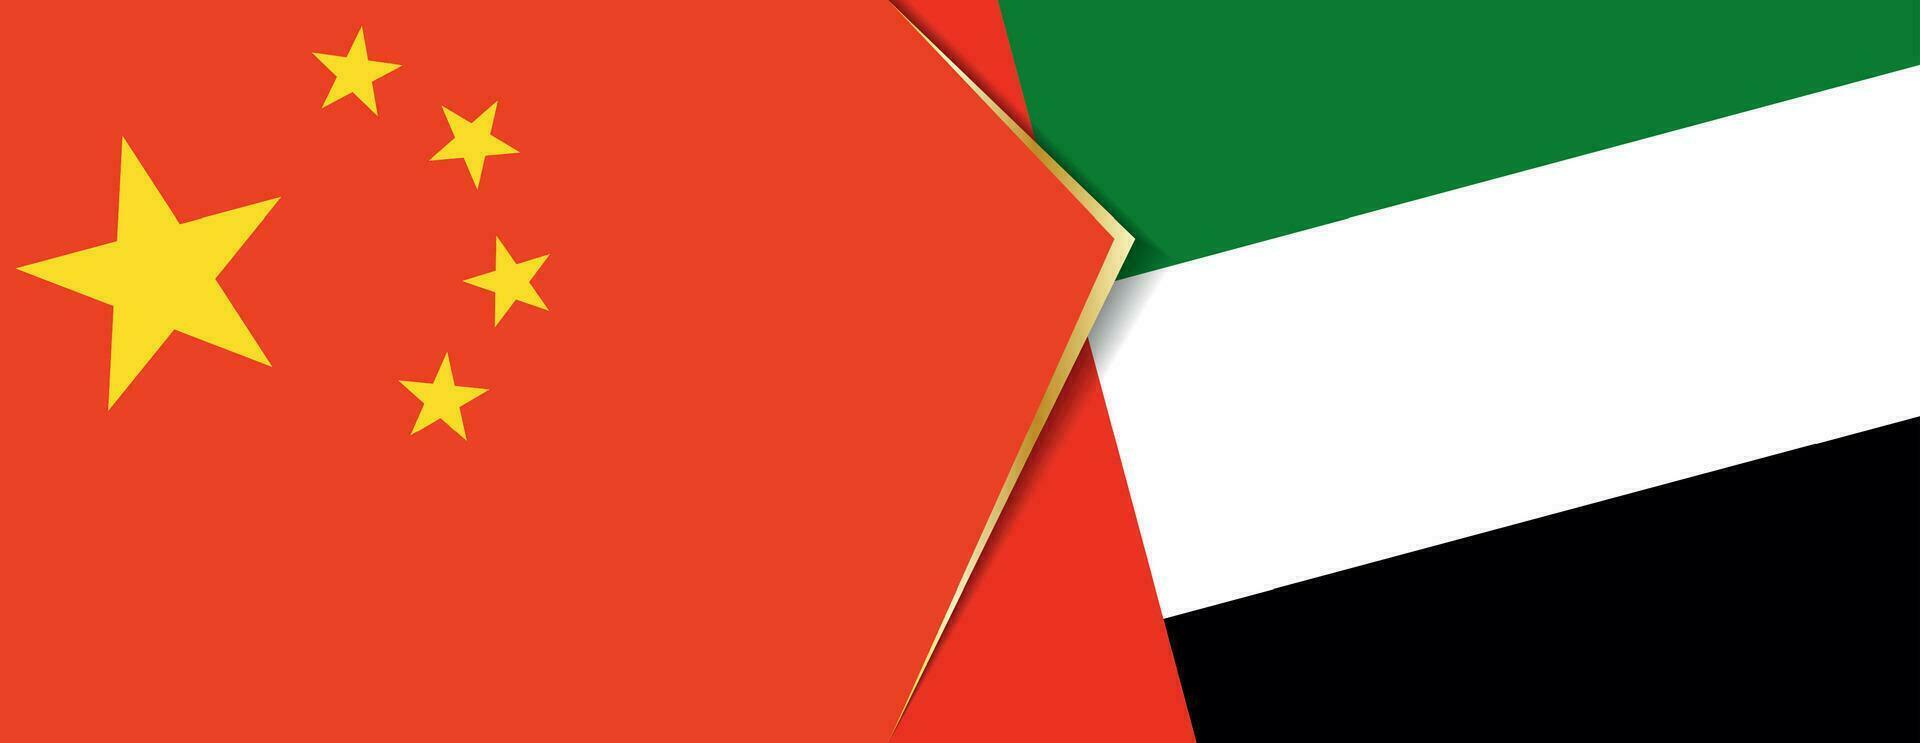 China and United Arab Emirates flags, two vector flags.